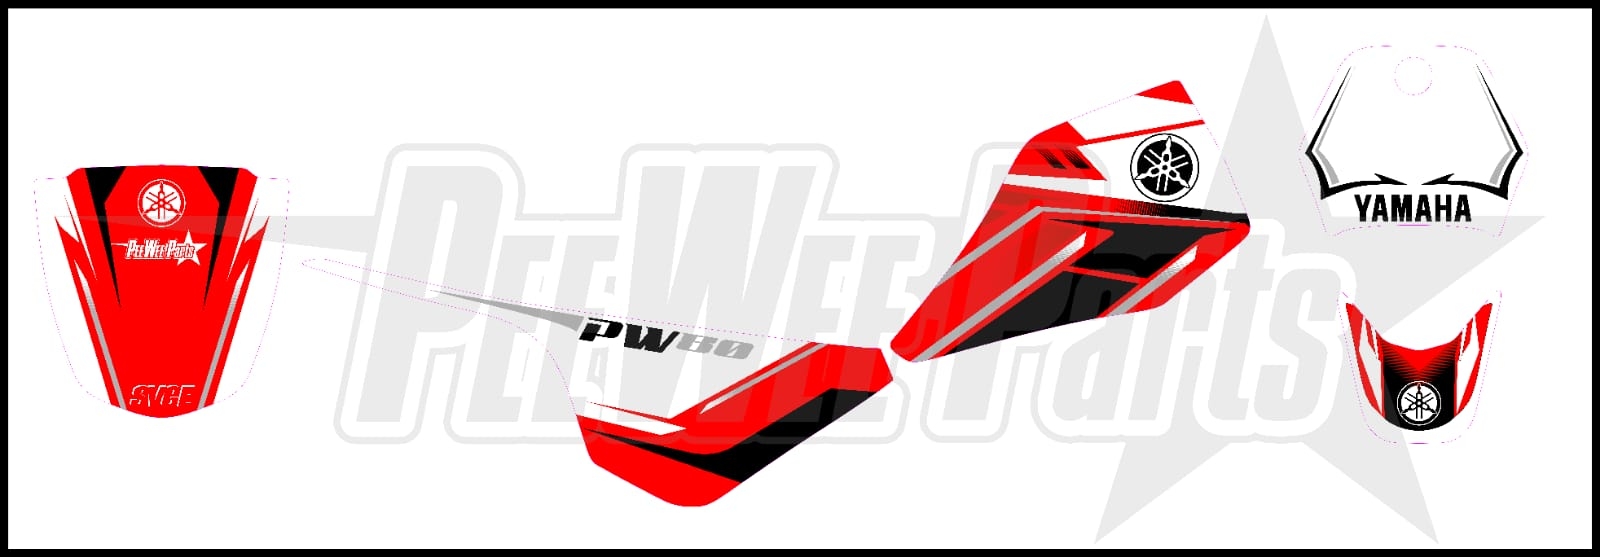 pw80 Decals stickers-yamaha red-0